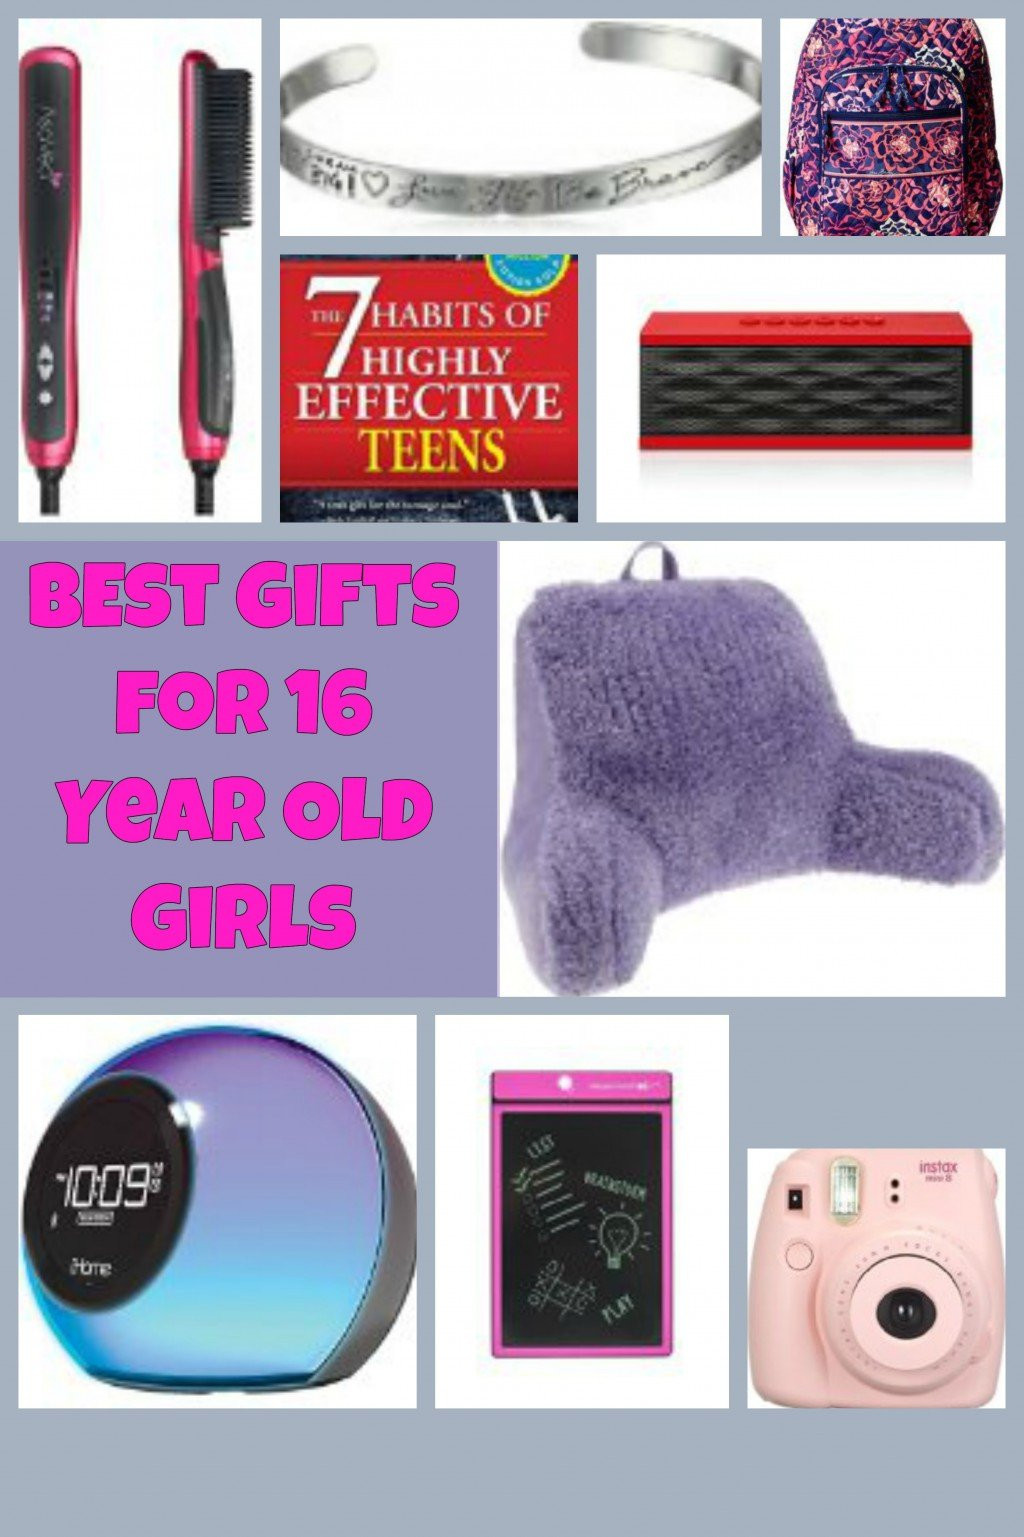 Gift Ideas For 16 Year Old Girls
 Best Gifts for 16 Year Old Girls Christmas and Birthday